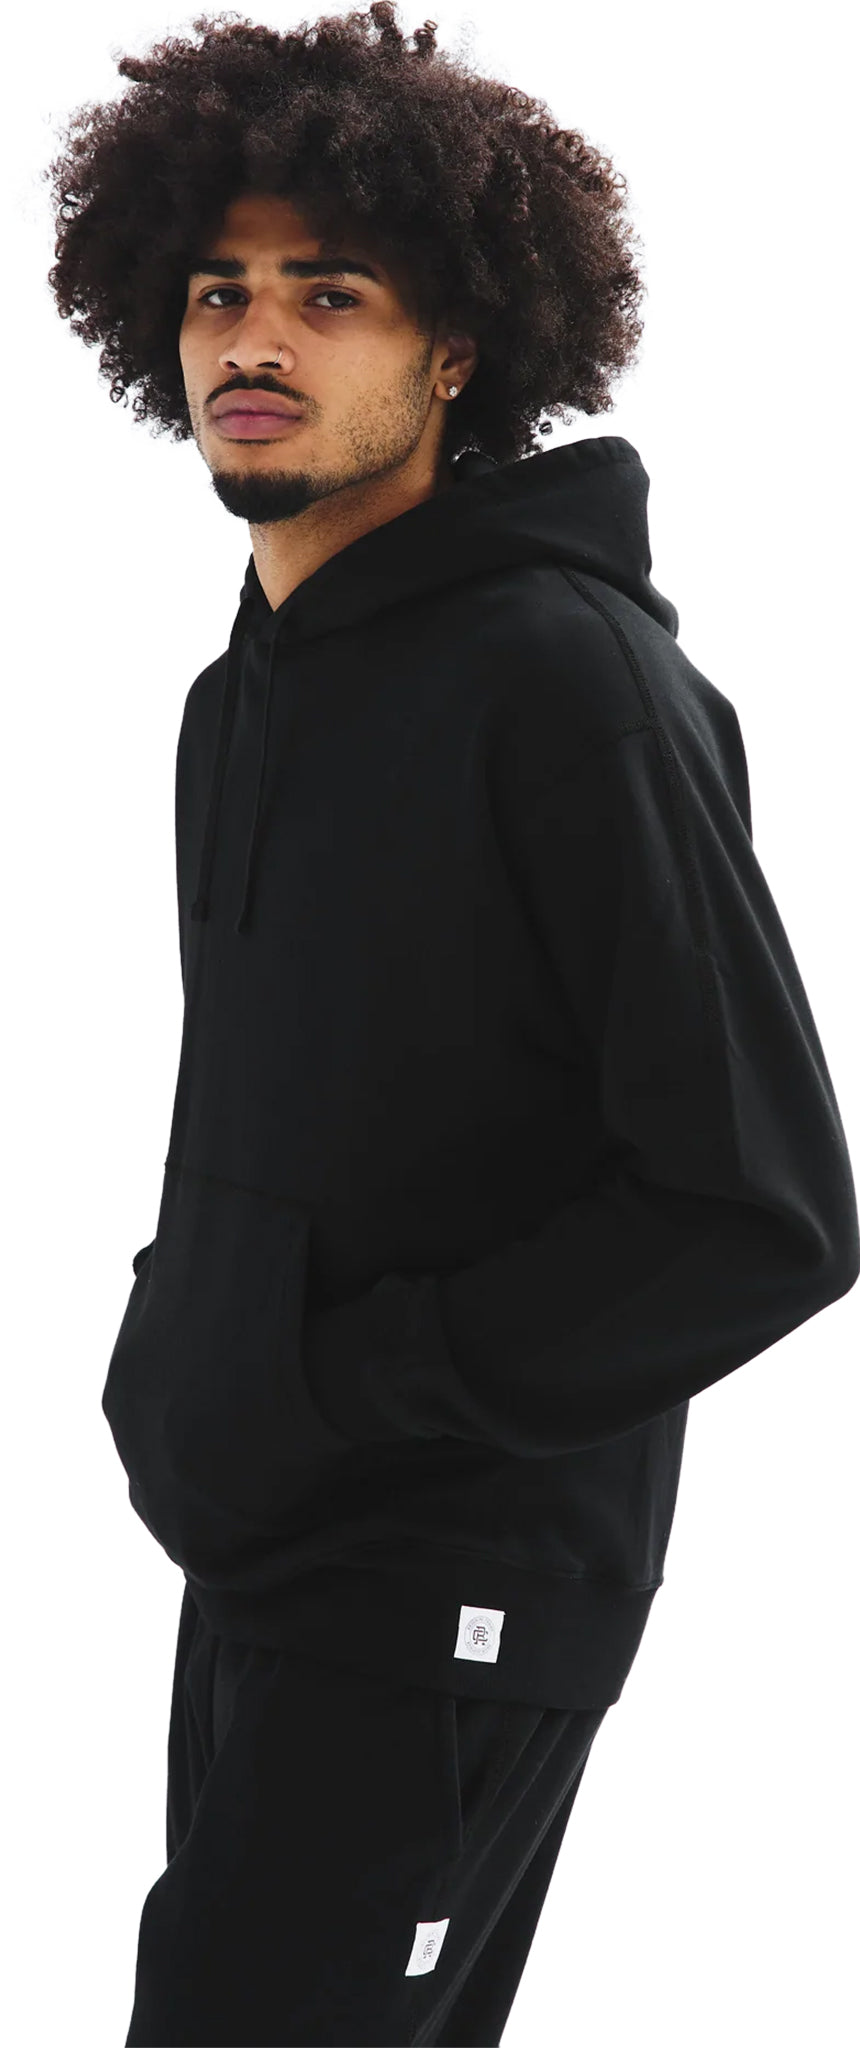 Reigning Champ Pullover Hoodie - Mid Weight Terry - Men's